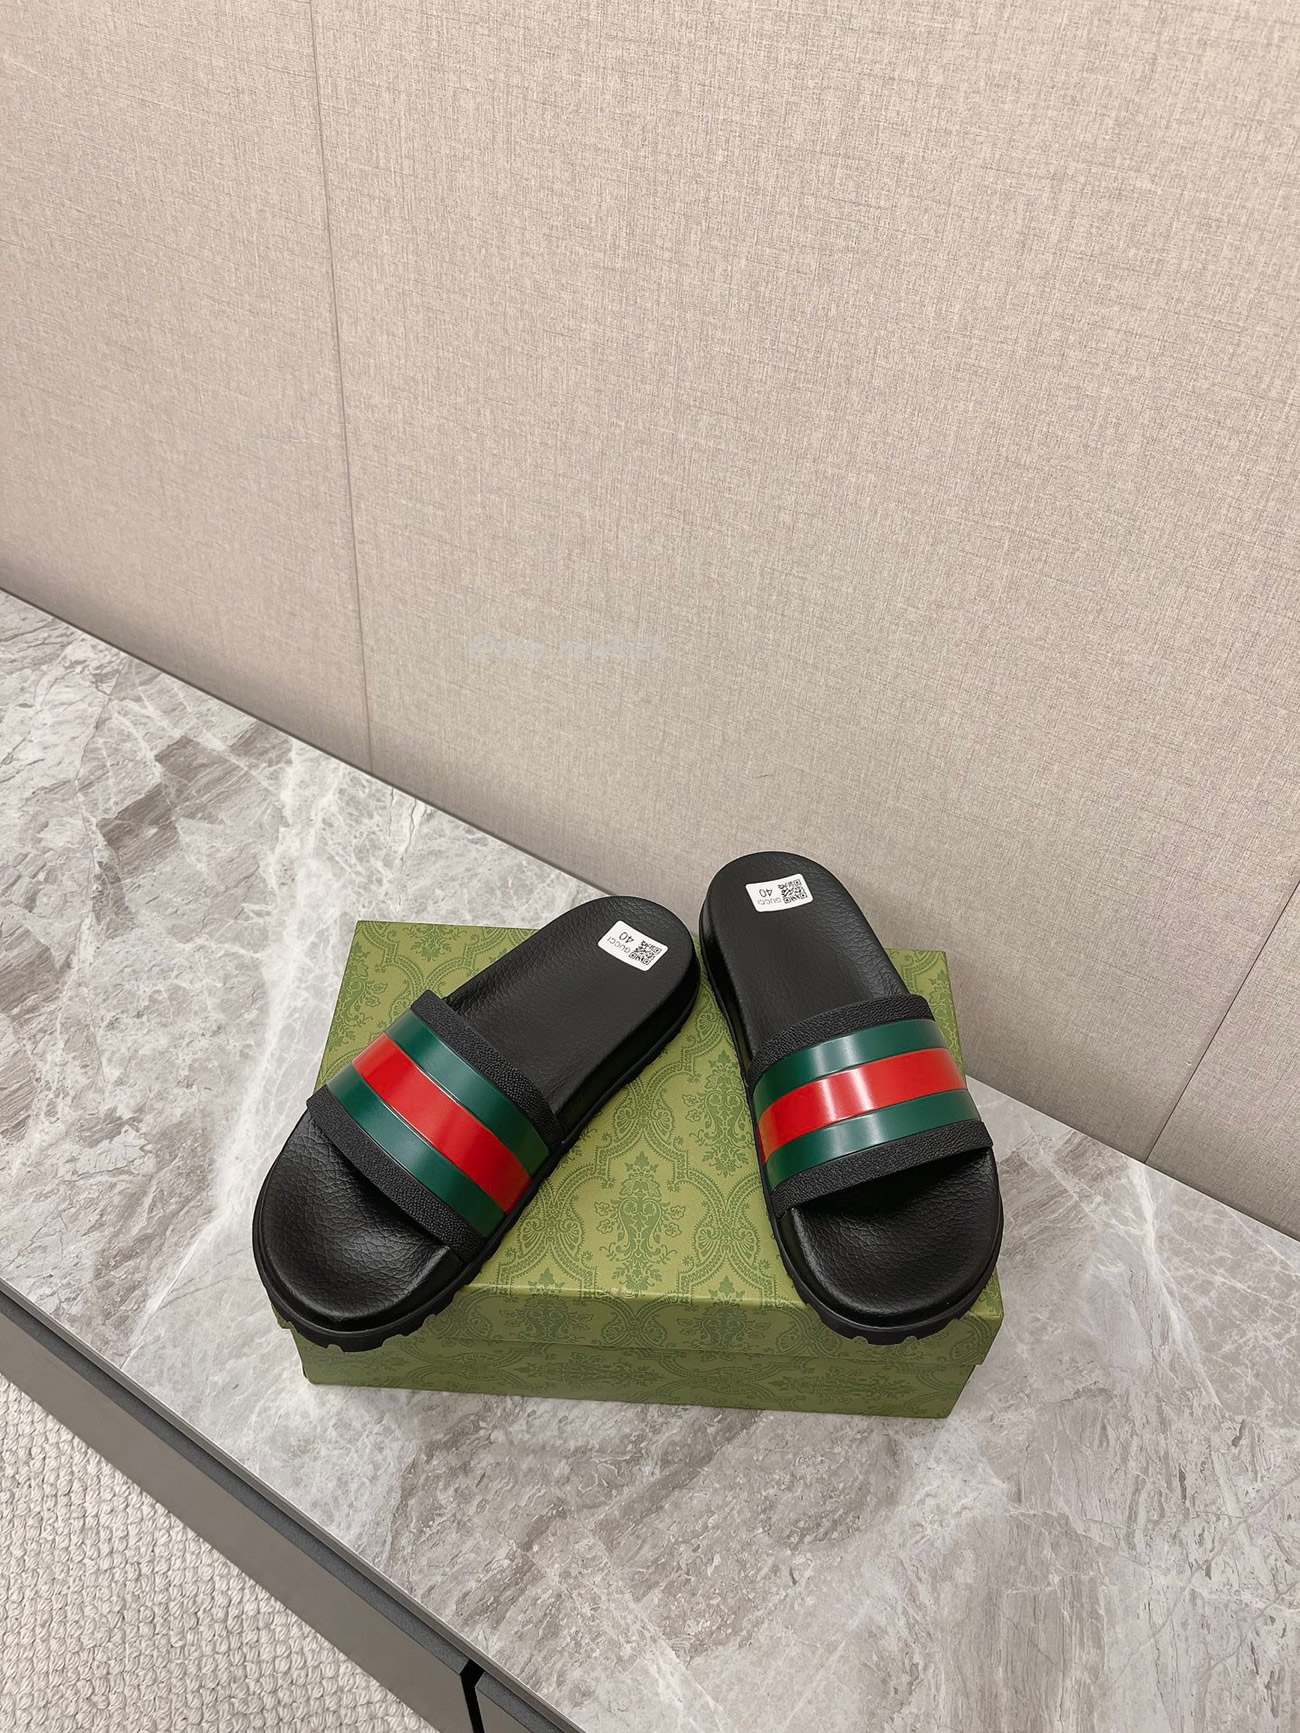 Gucci Mens Woven Leather Sandals 429469 Gib10 1098 (10) - newkick.org